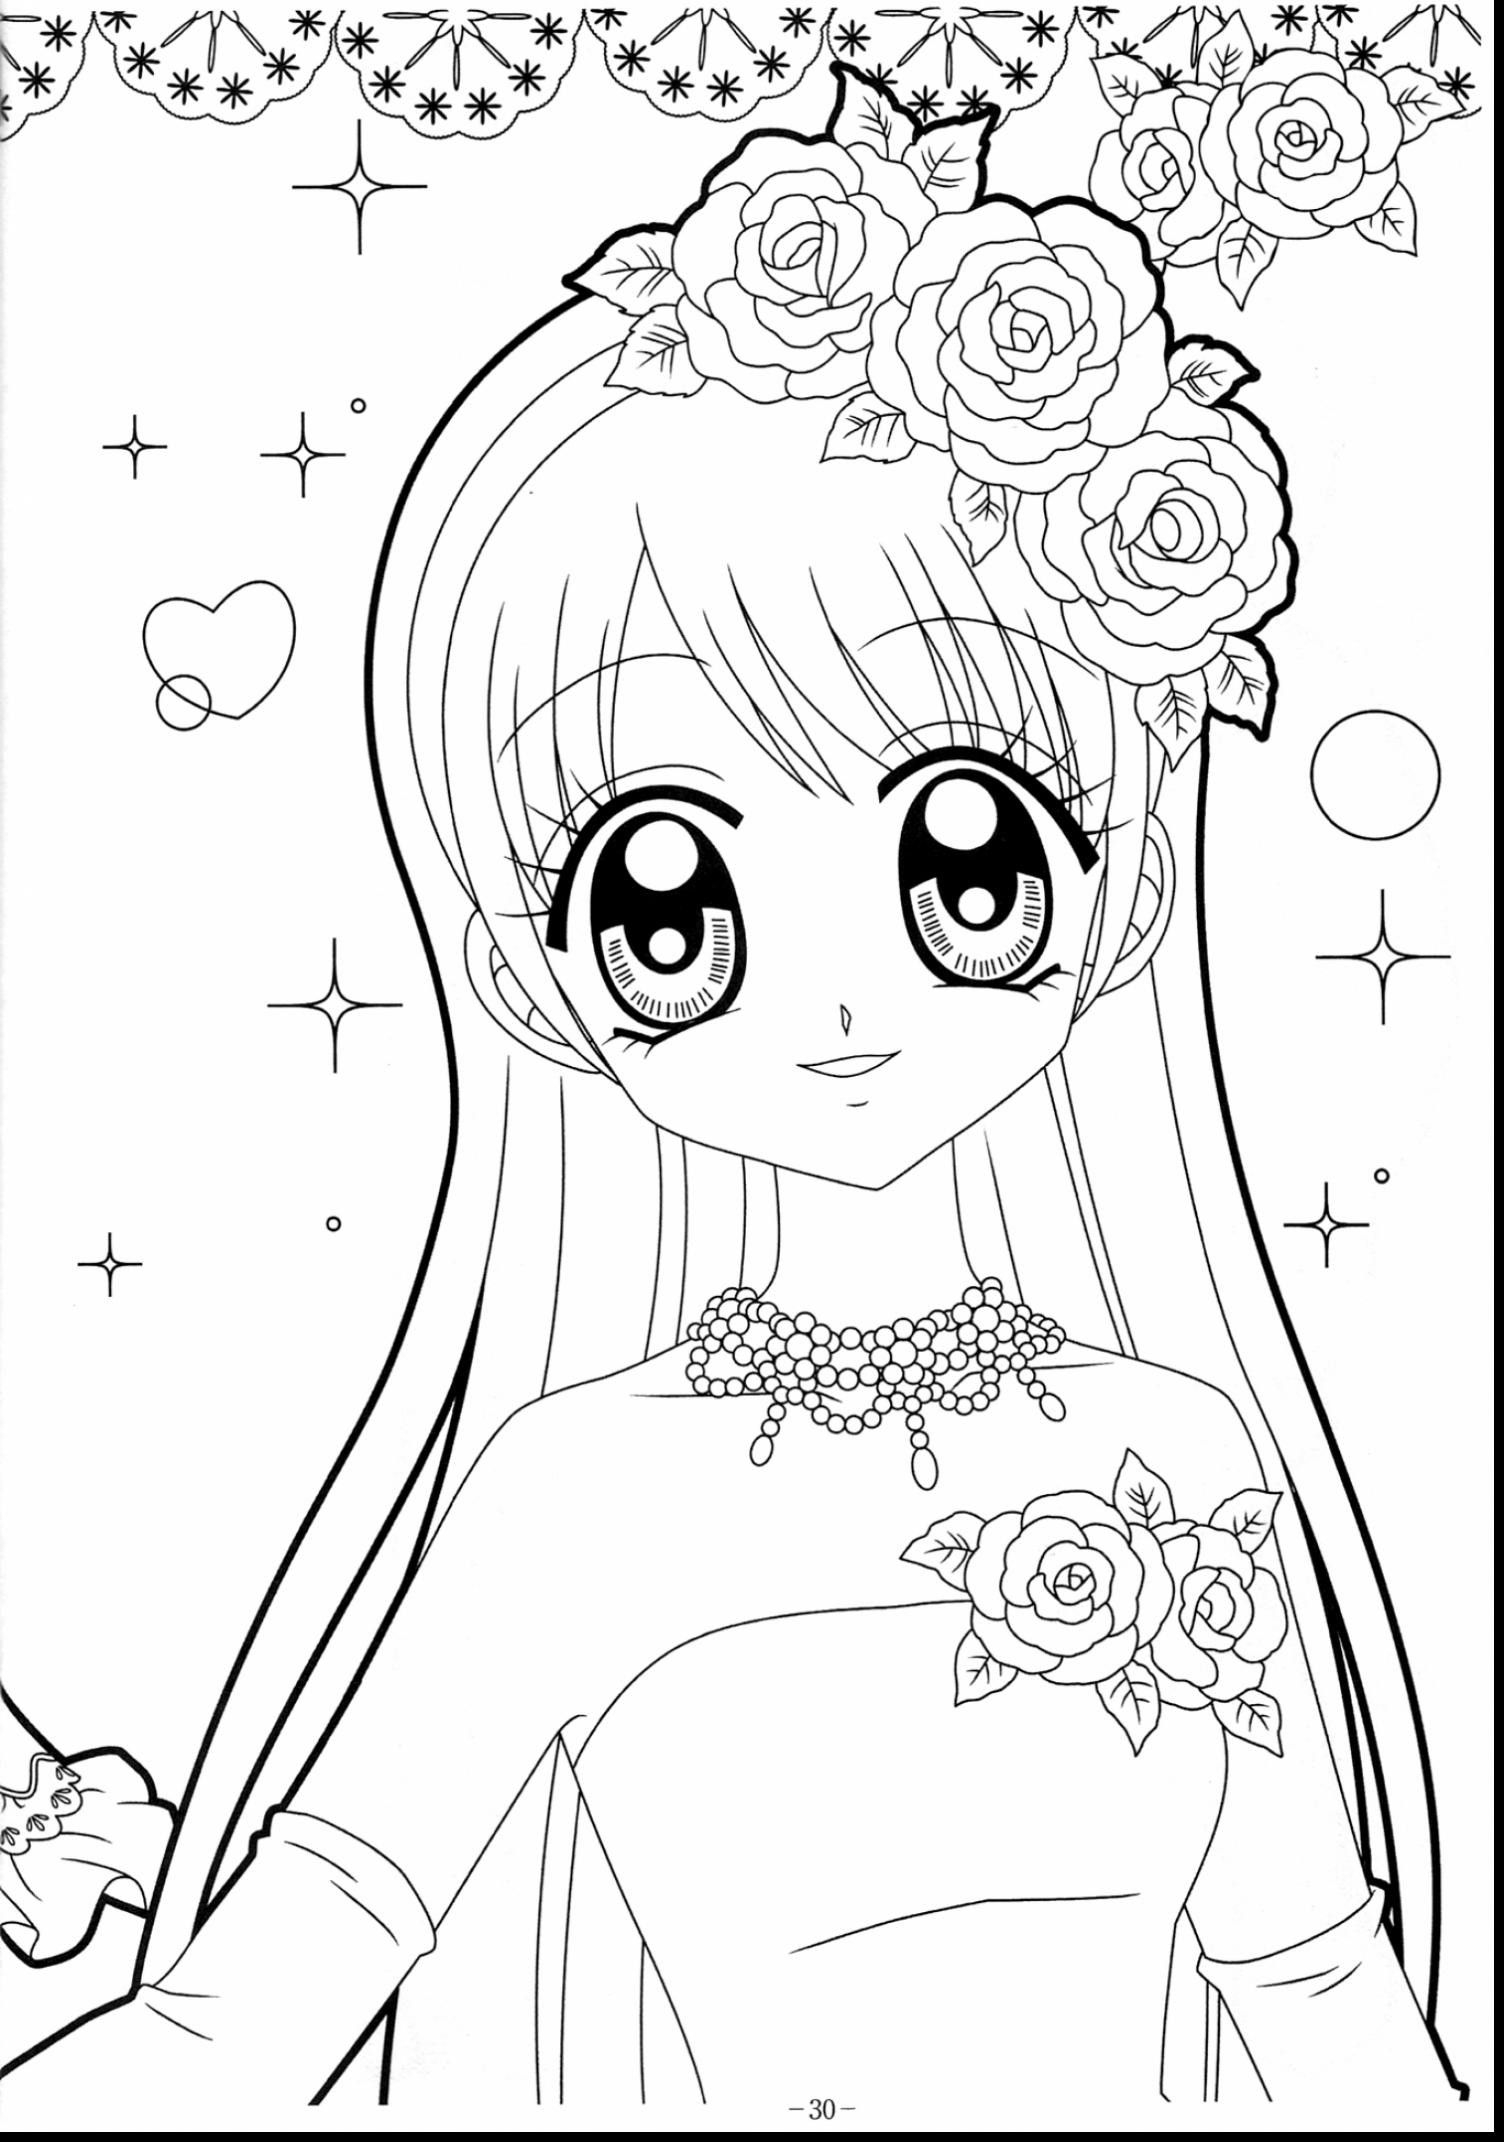 Kawaii Coloring Pages Coloring Ideas Unbelievablei Anime Girl Coloring Pages With Ideas